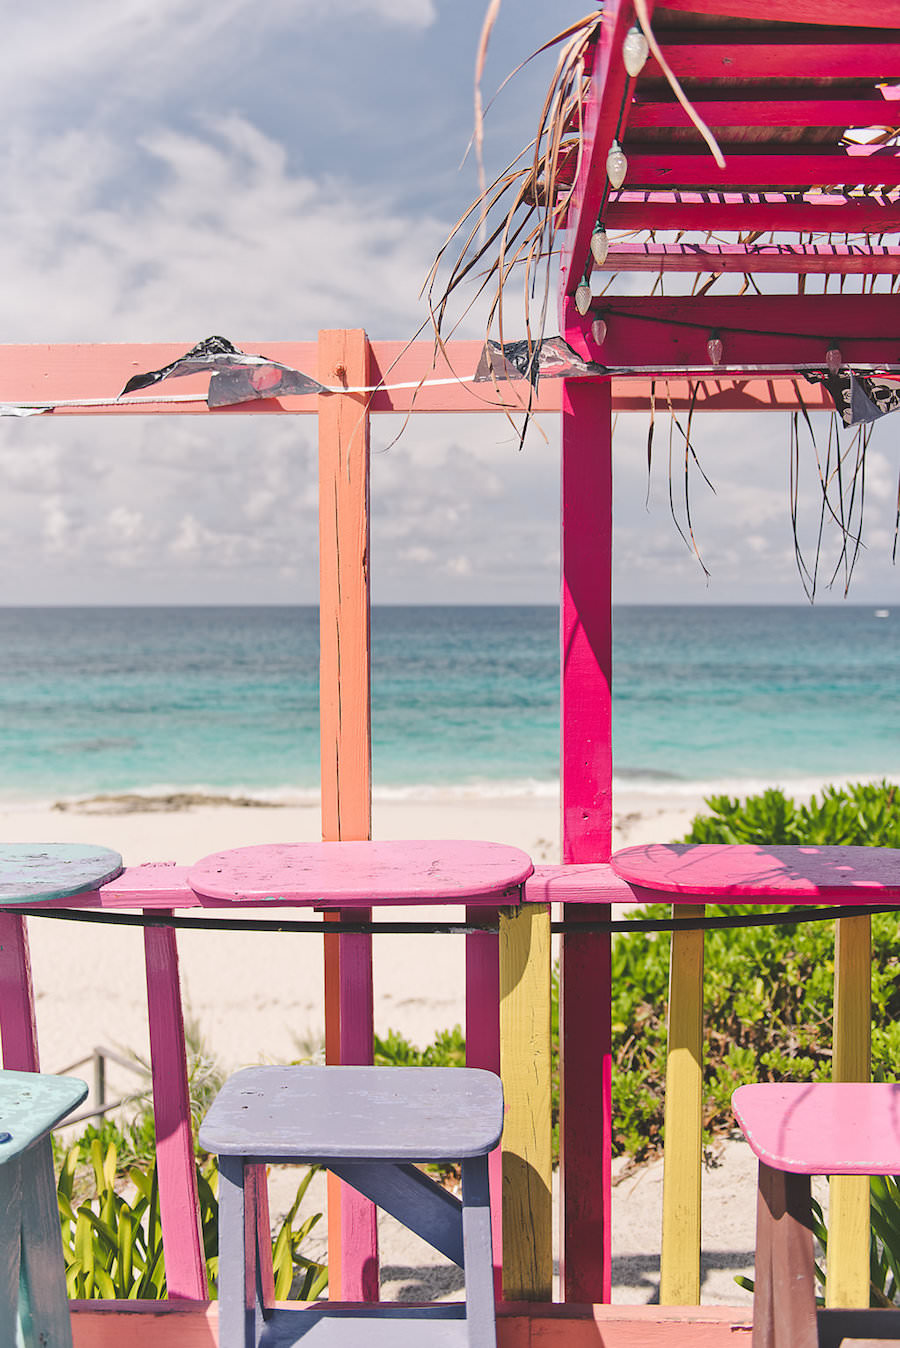 Nippers Beach Bar - Private Boating Excursion in the Abaco Islands | Abaco Beach Resort Bahamas Destination Wedding Venue